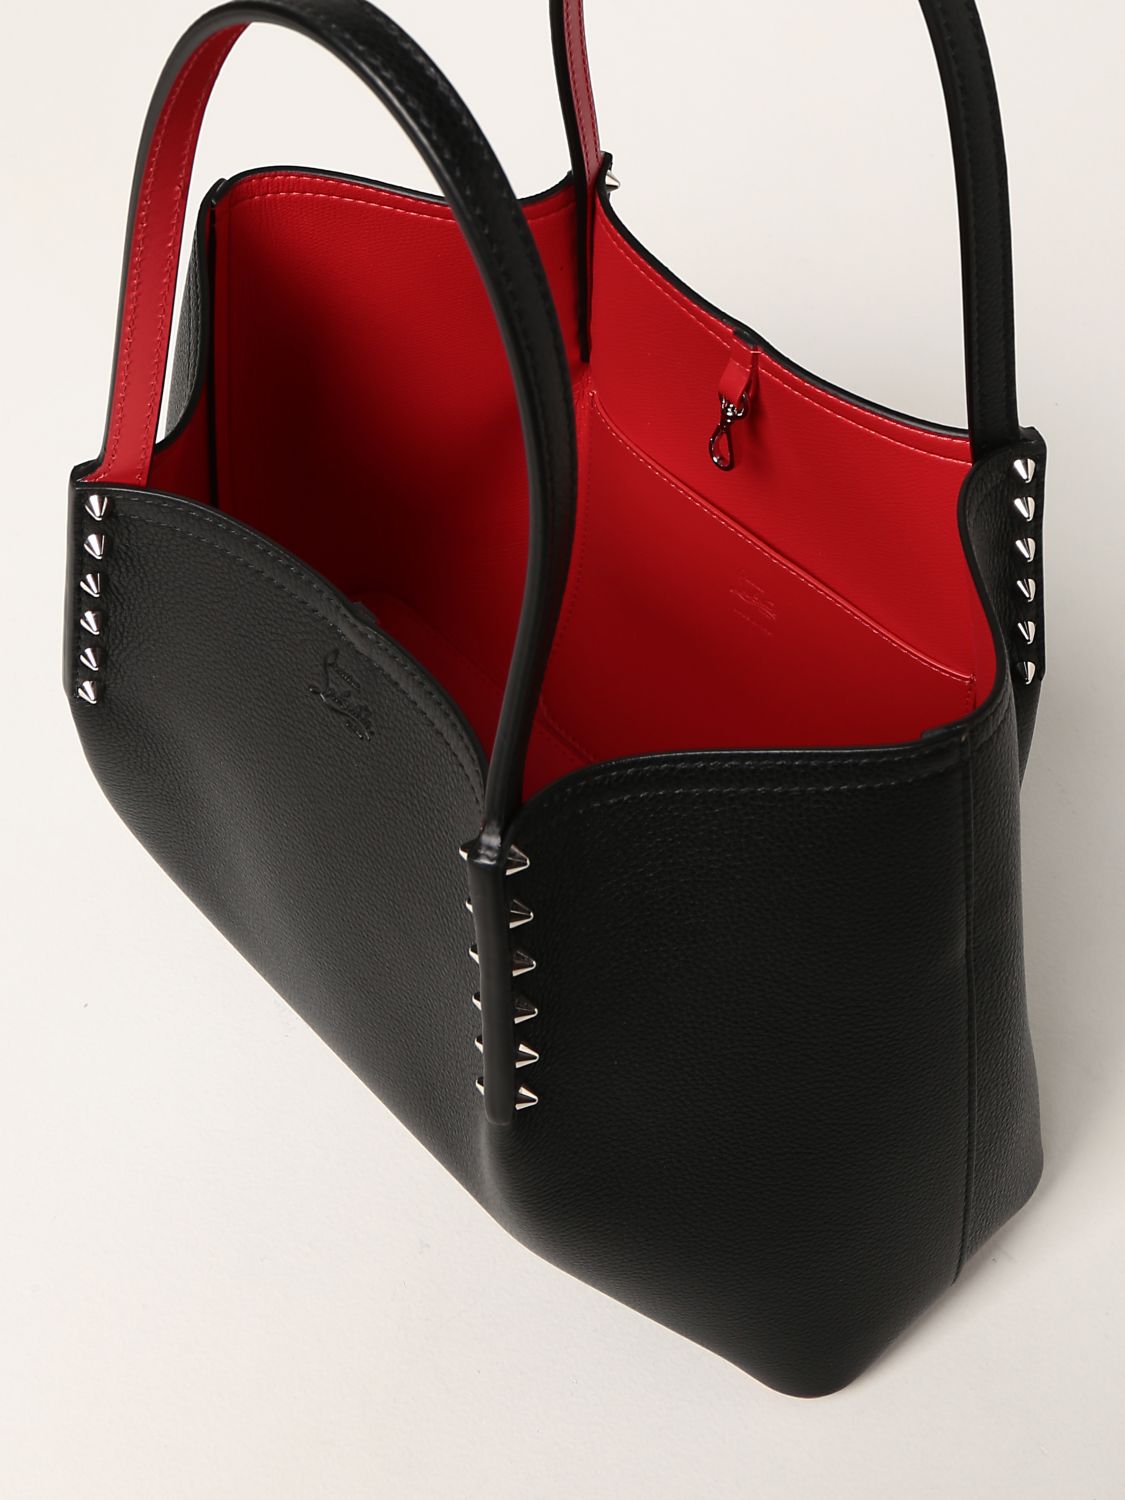 CHRISTIAN LOUBOUTIN: Cabarock leather bag with spikes - Black